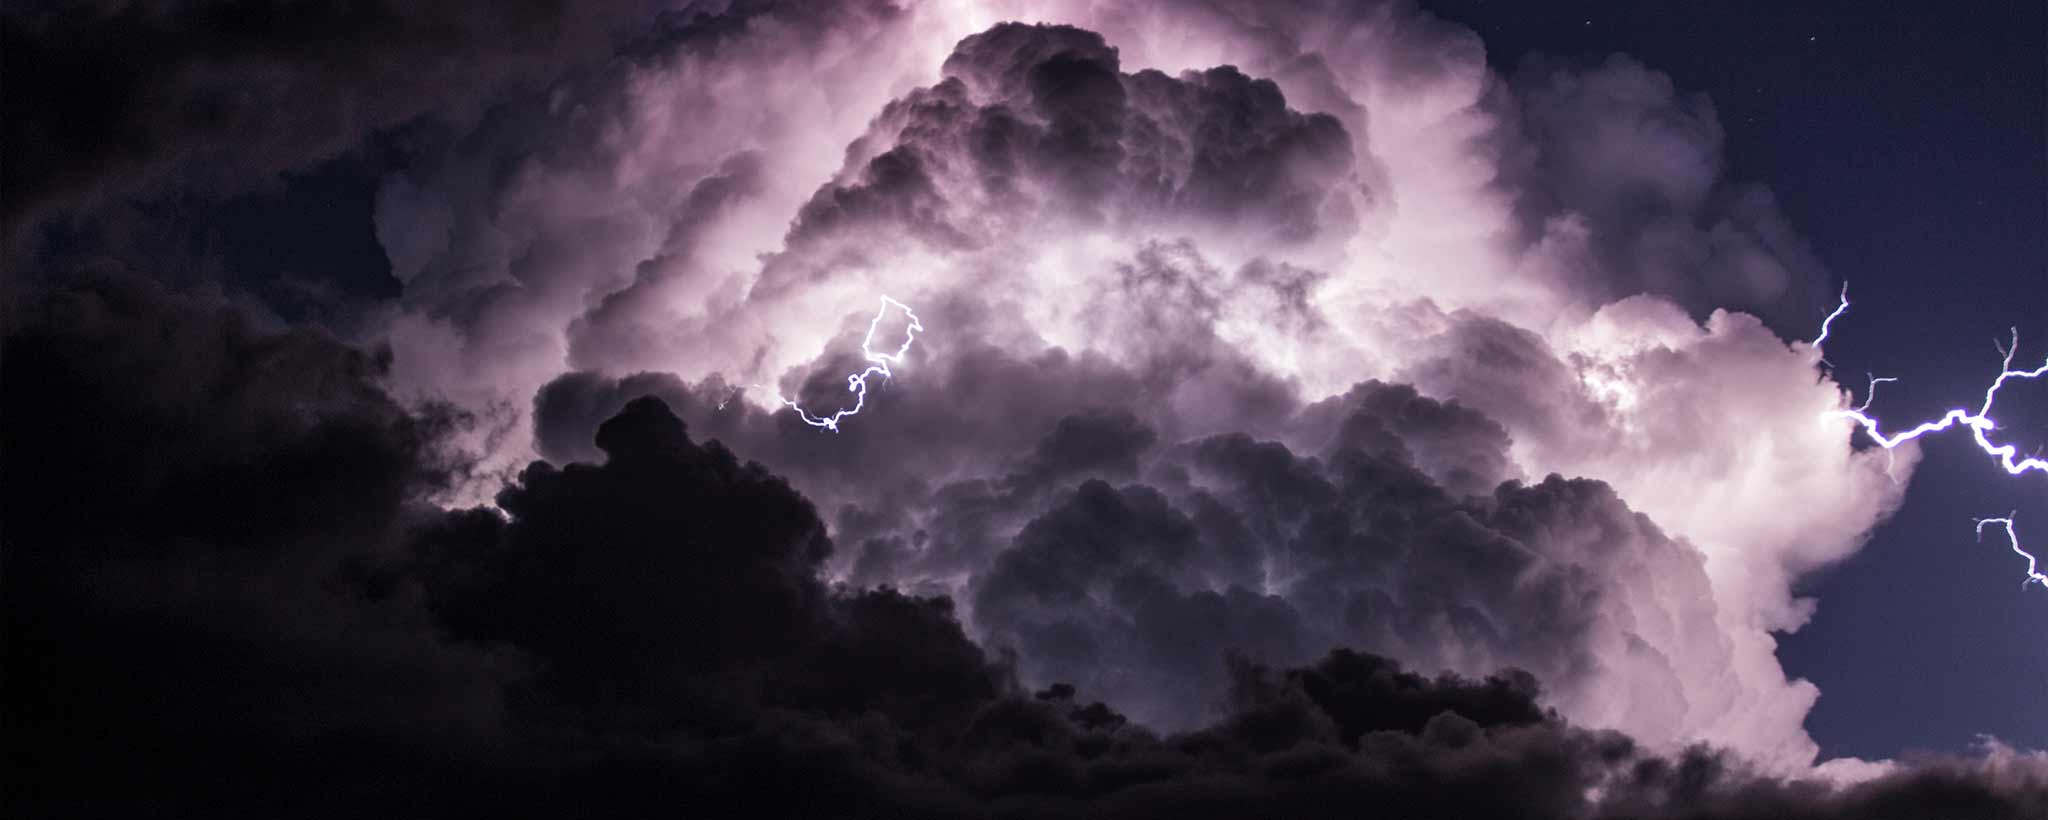 'Tropical electrical storm clouds'